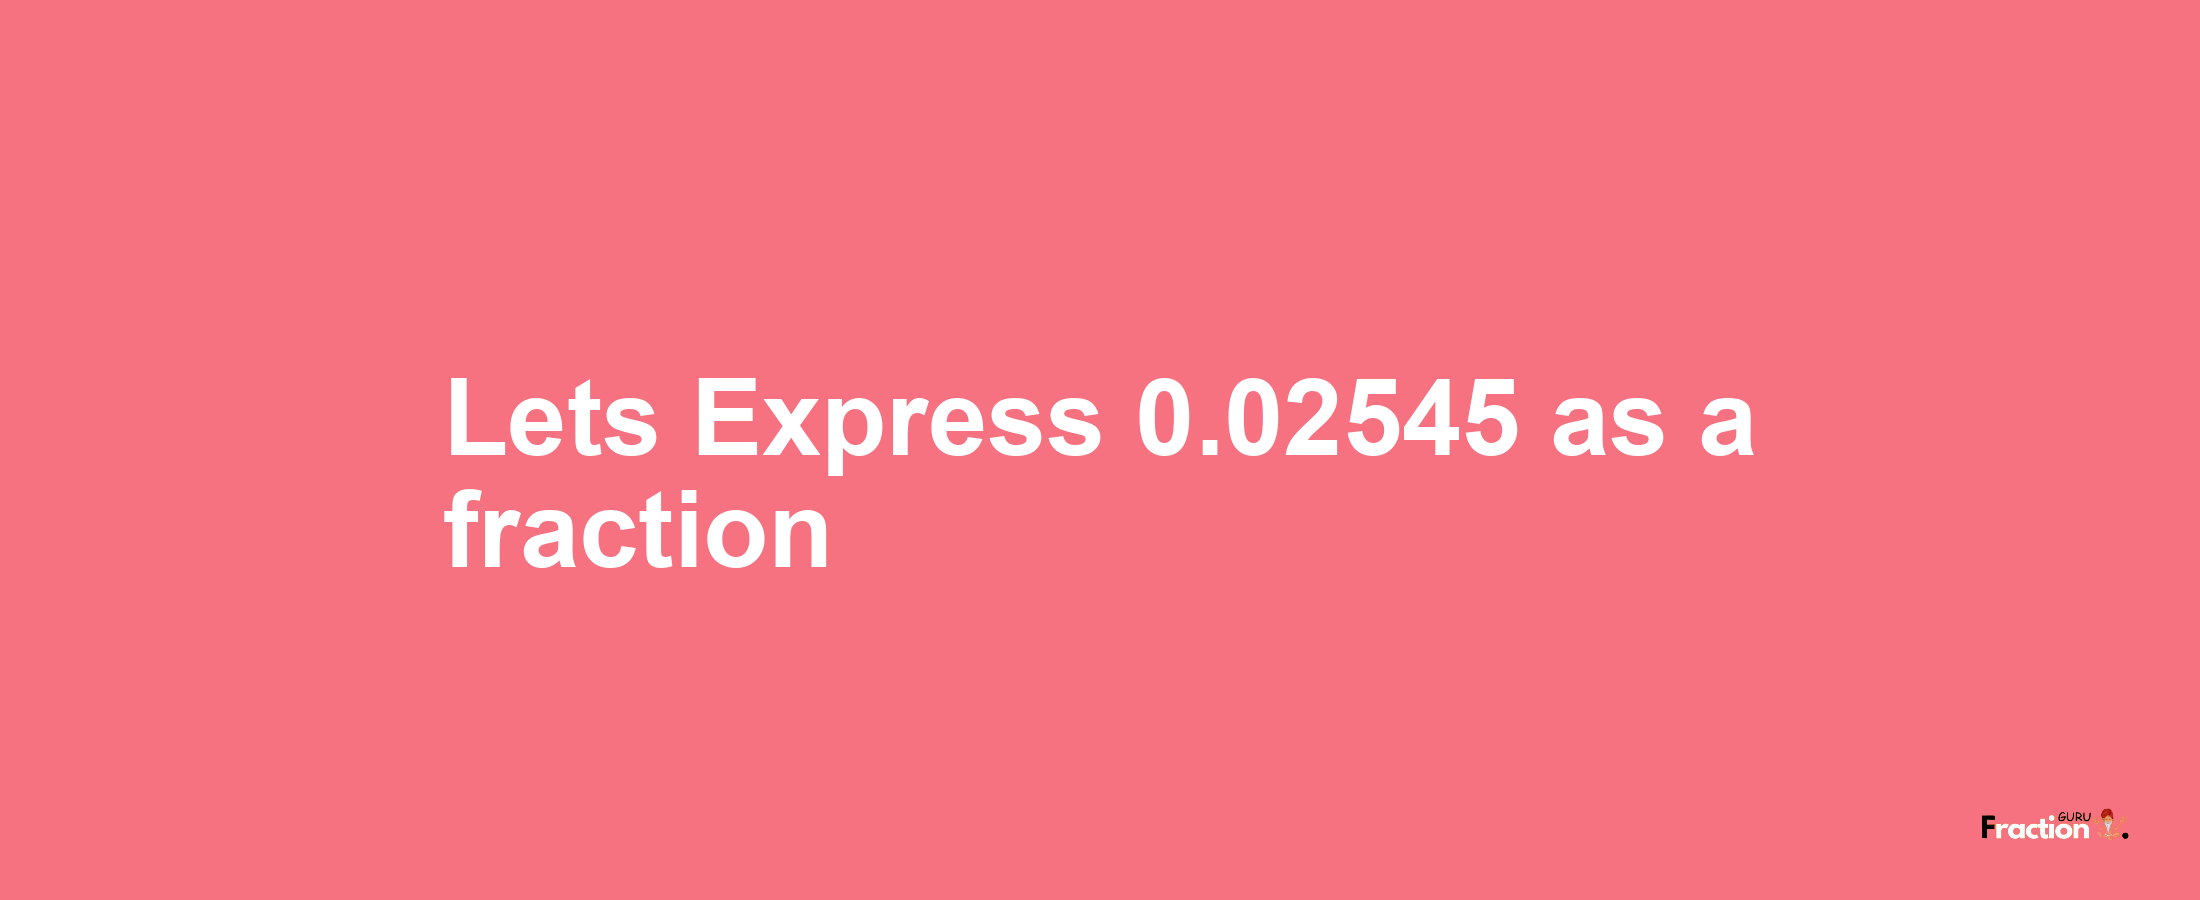 Lets Express 0.02545 as afraction